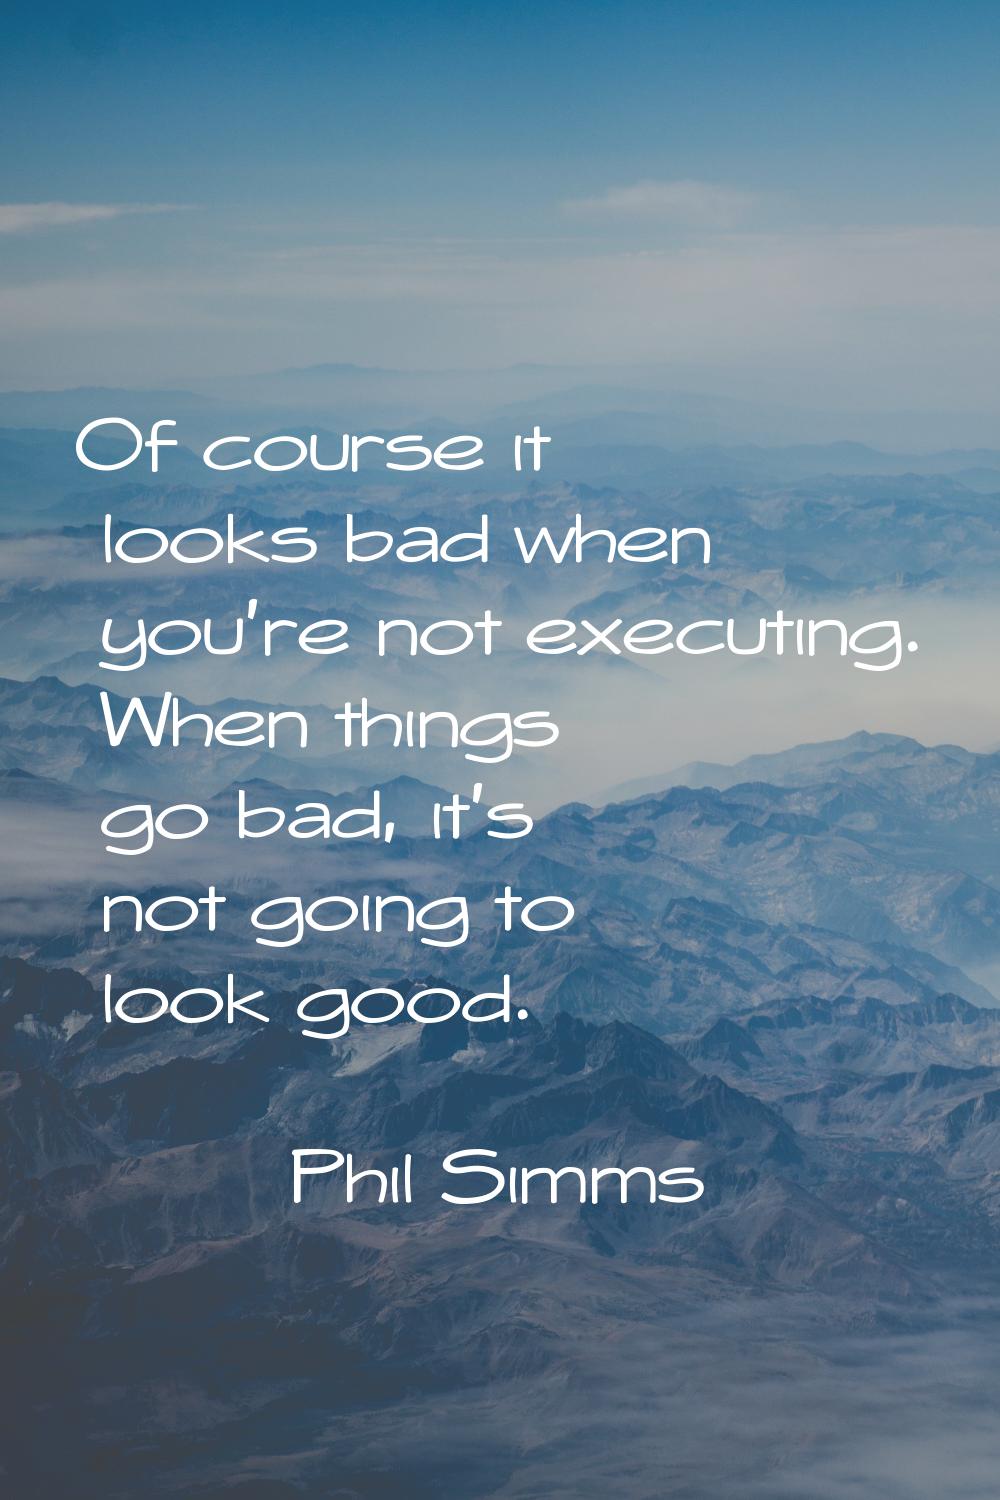 Of course it looks bad when you're not executing. When things go bad, it's not going to look good.